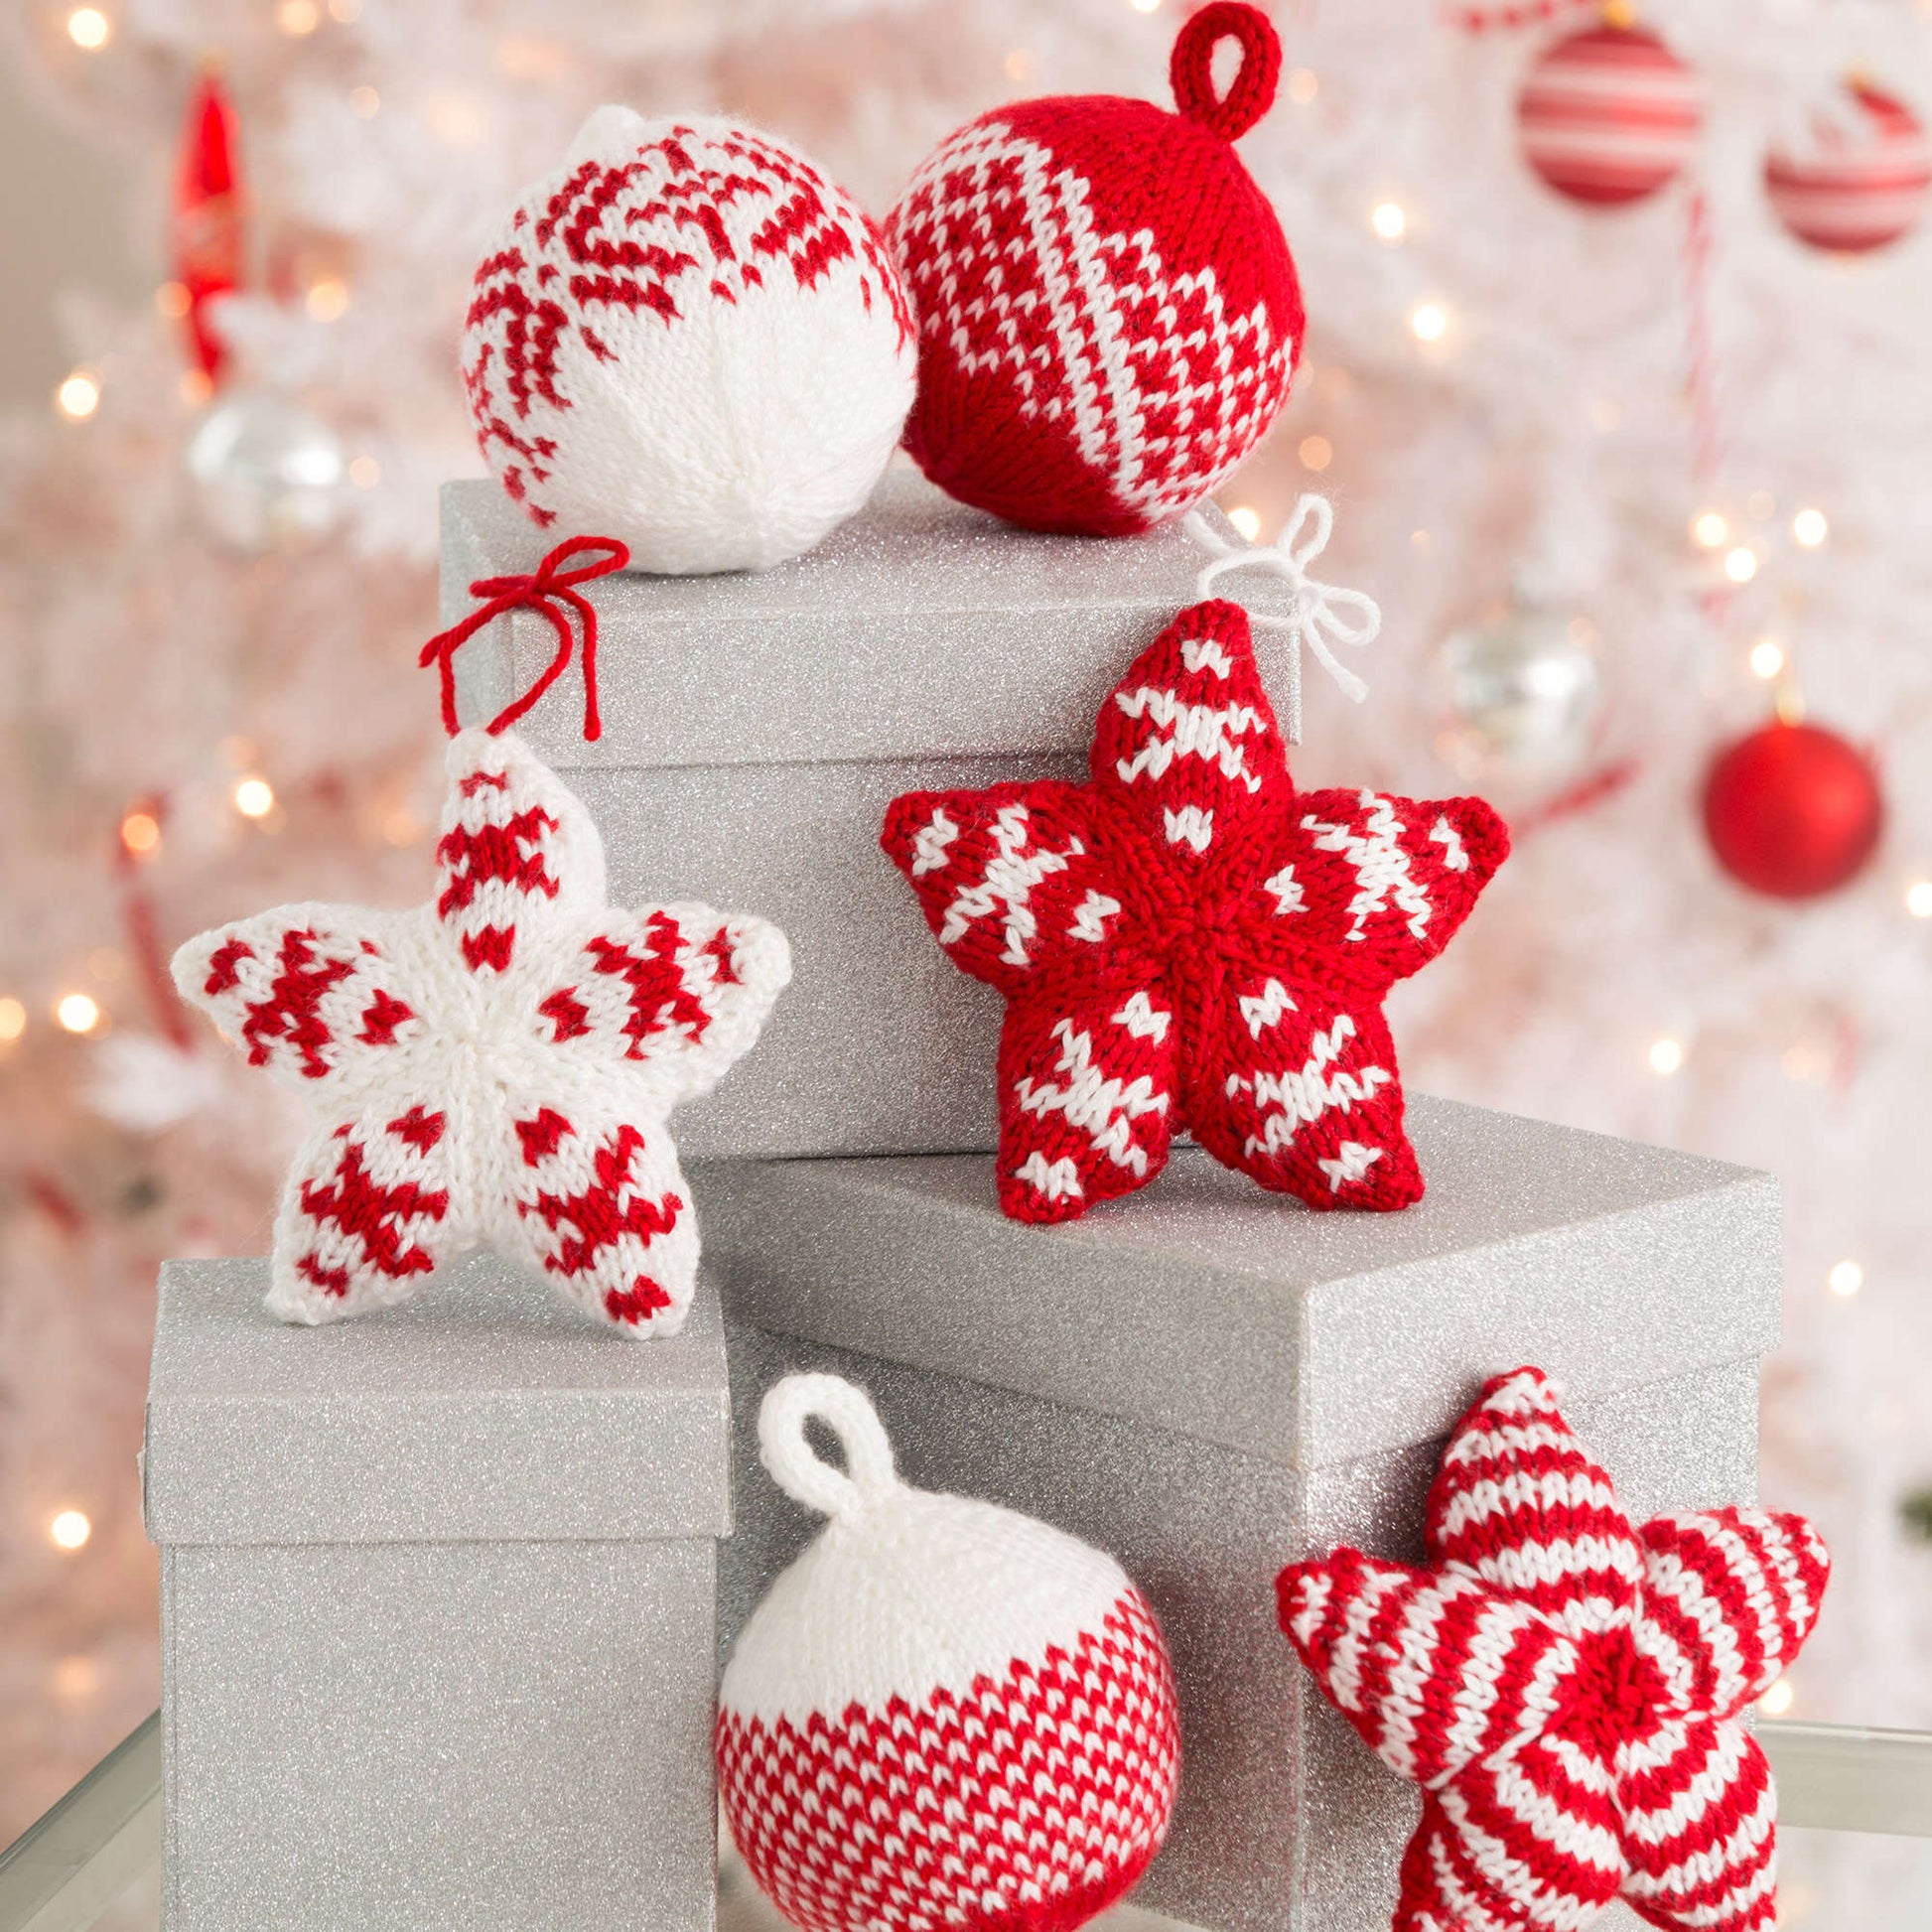 Free Red Heart Holiday Stars And Balls Ornaments Pattern